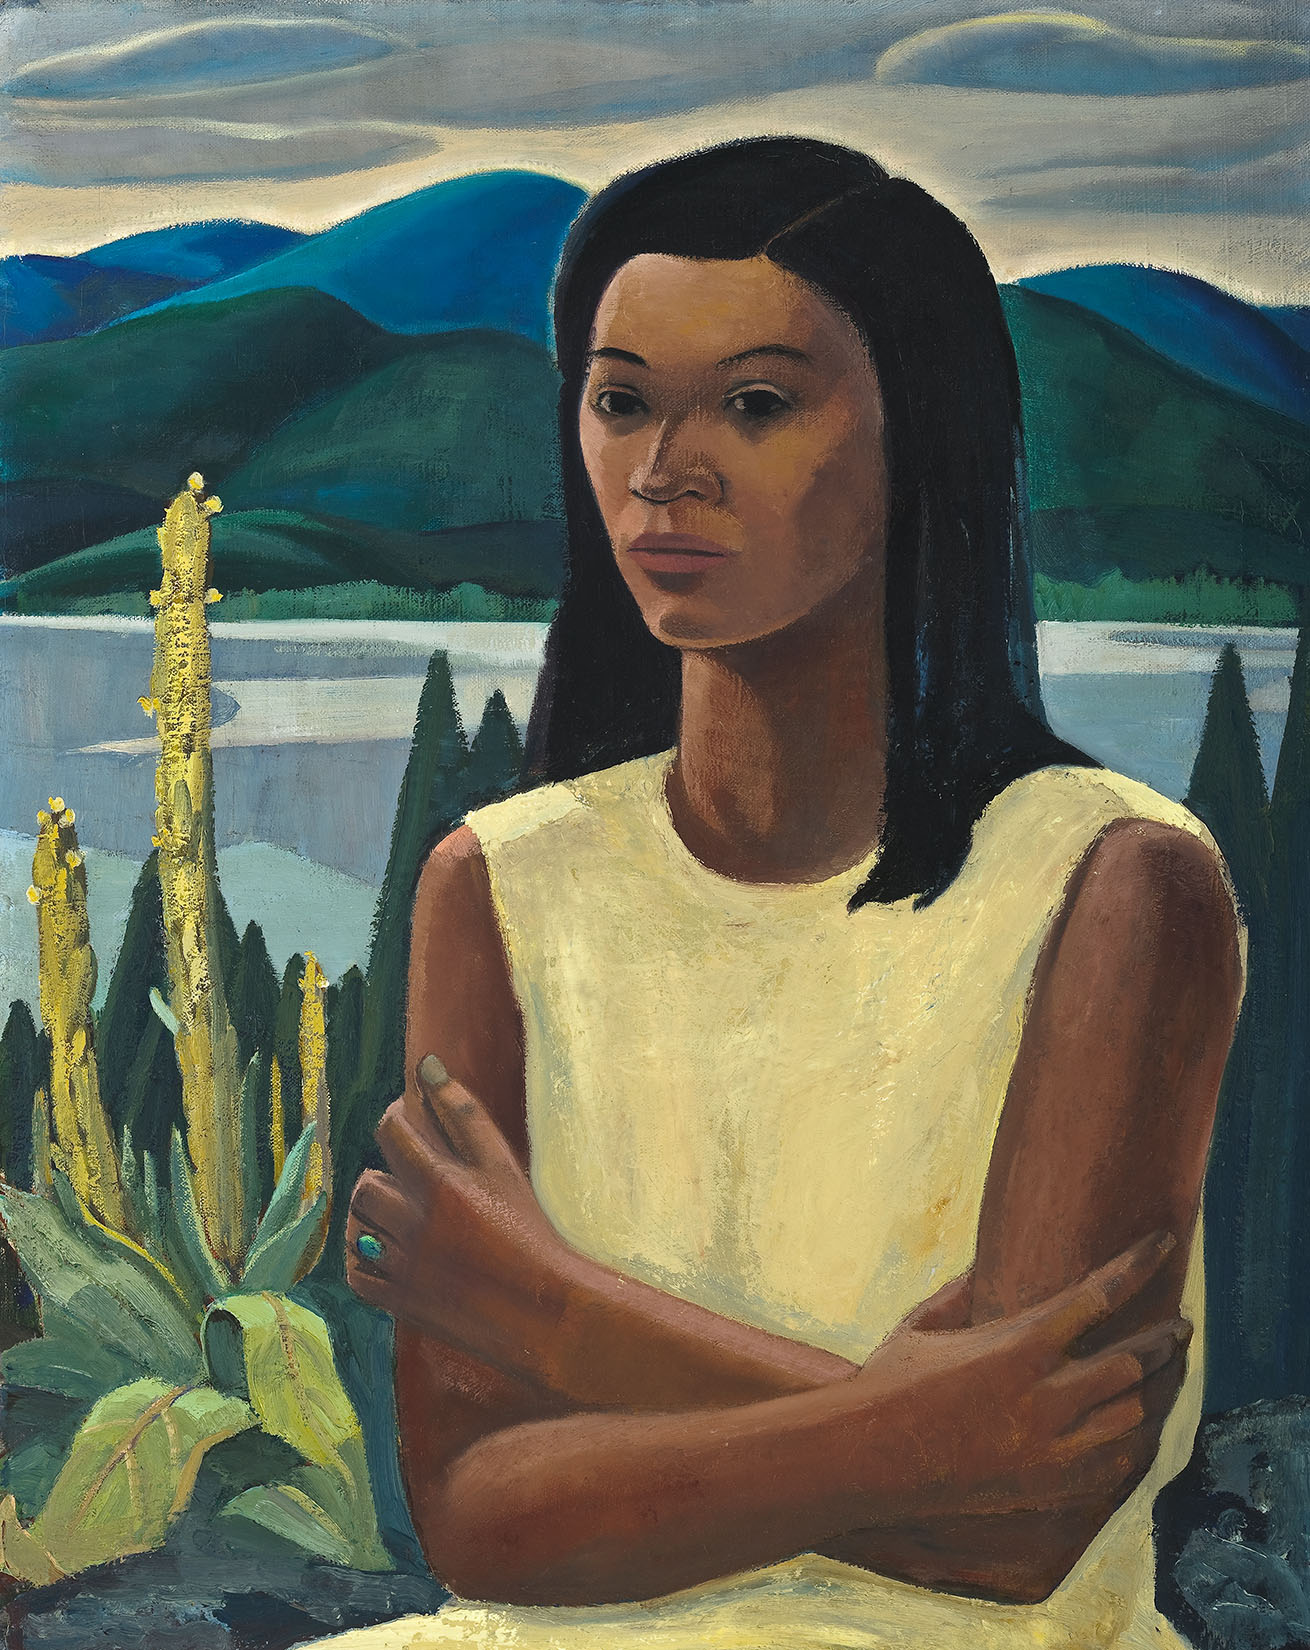 A young woman with brown skin looks directly at the viewer. She is depicted from the torso up. She has shoulder-length black hair. She is wearing a white sleeveless top and her arms are crossed. There is a turquoise ring on her left ring finger. Behind her is a tall plant with a yellow stalk and large green leaves. There is a lake and mountains in the distance, the sky is full of rolling clouds.